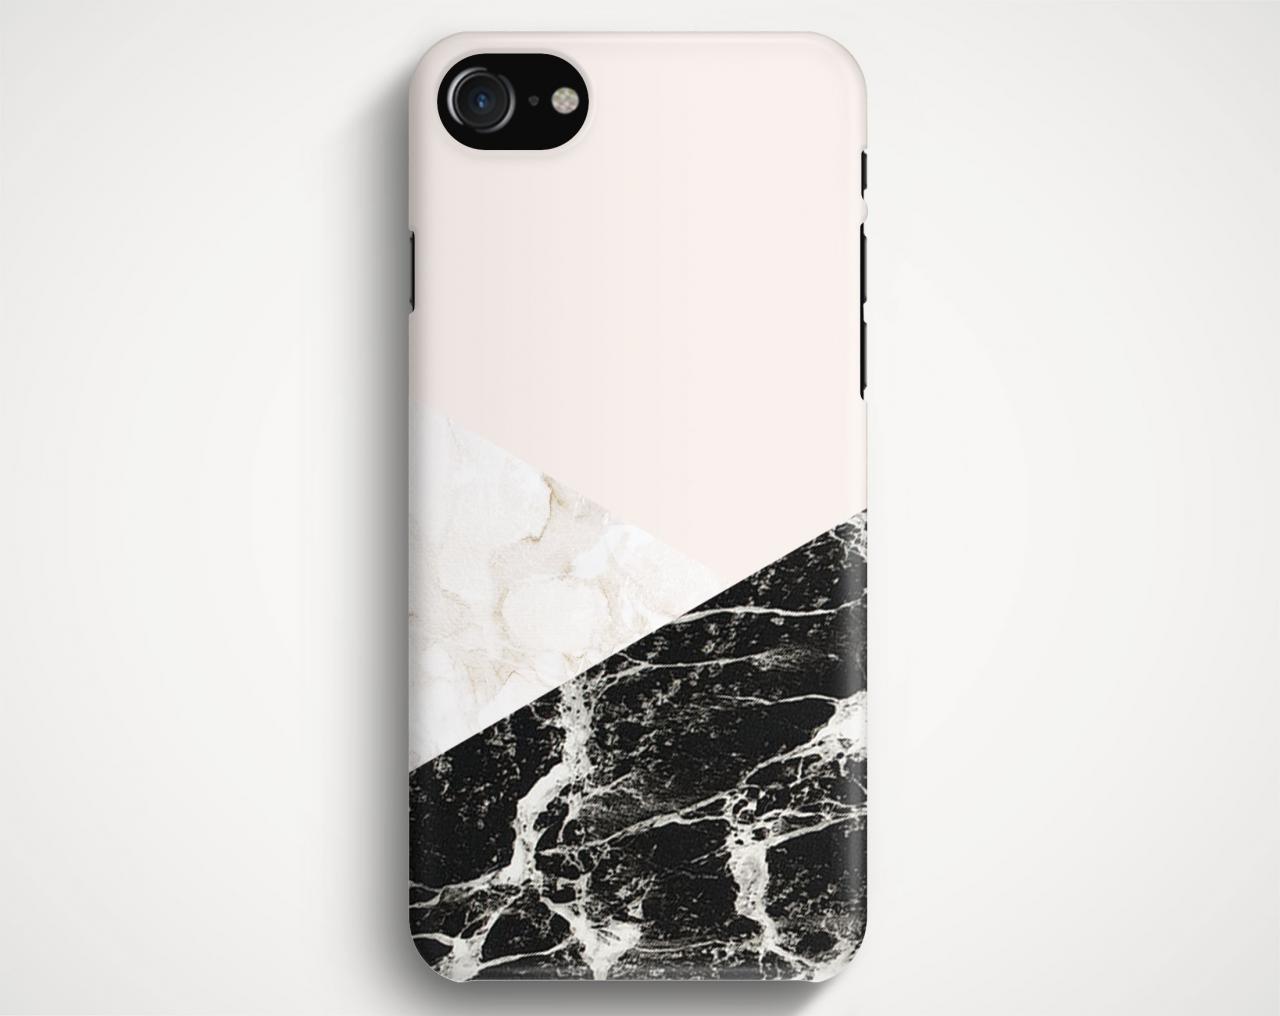 Geometic Marble Texture Case For Iphone 7 Iphone 7 Plus Samsung Galaxy S8 Galaxy S7 Galaxy A3 Galaxy A5 Galaxy A7 Lg G6 Lg G5 Htc 10